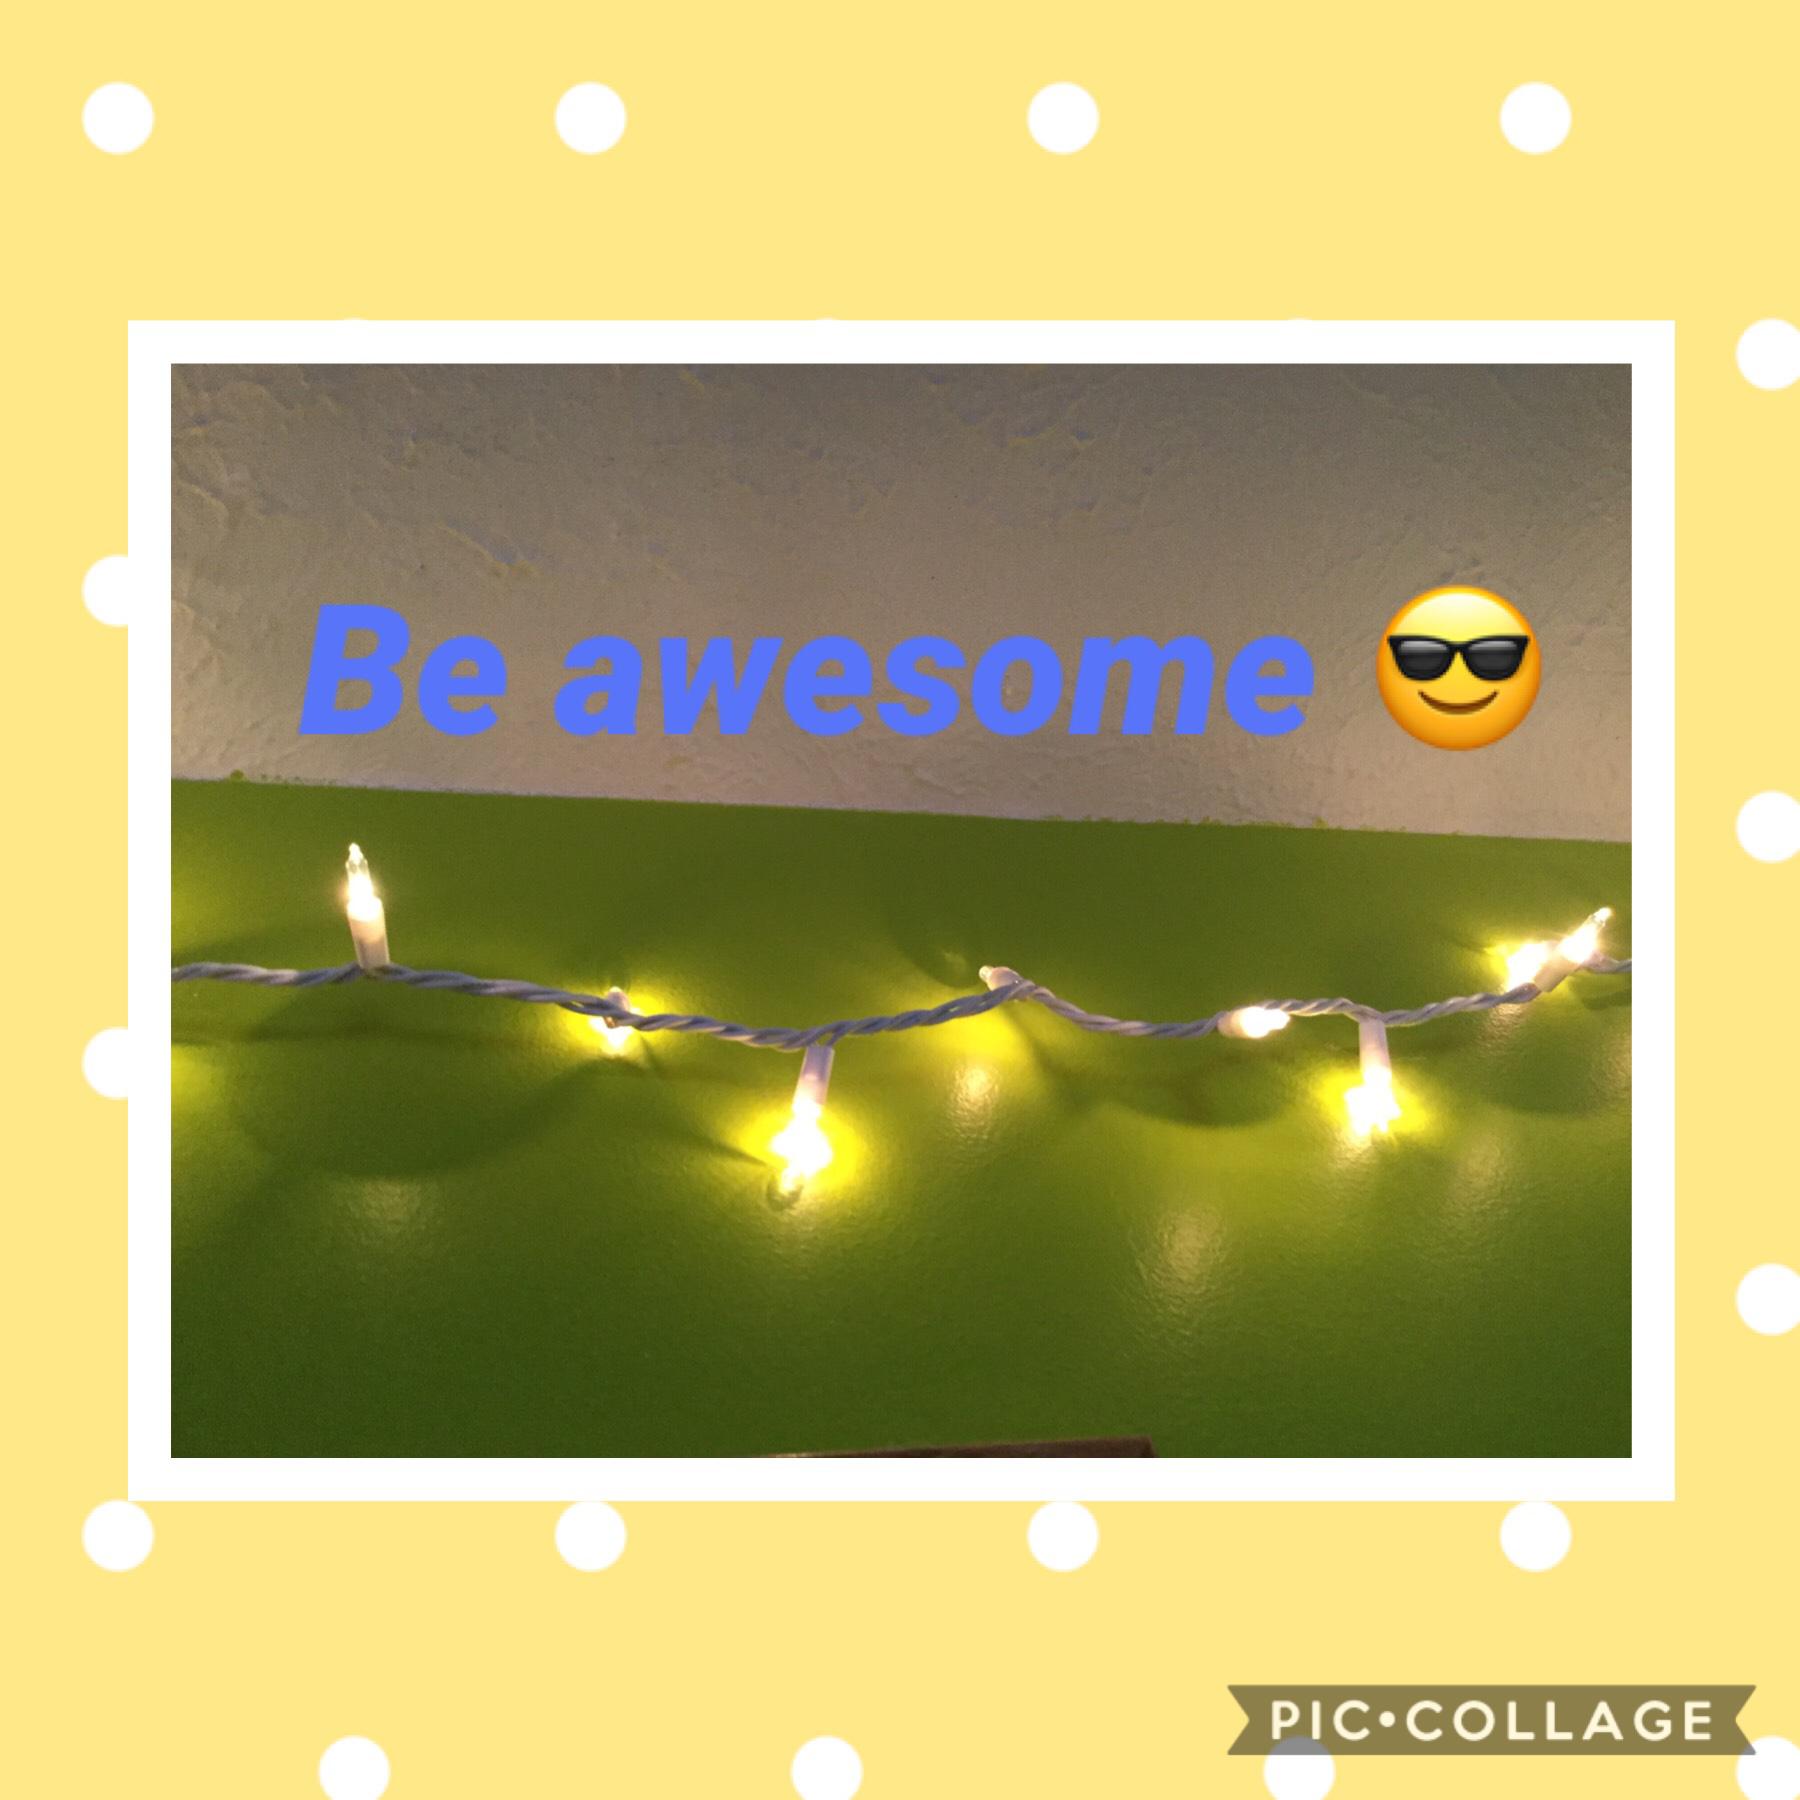 Be awesome 😎 